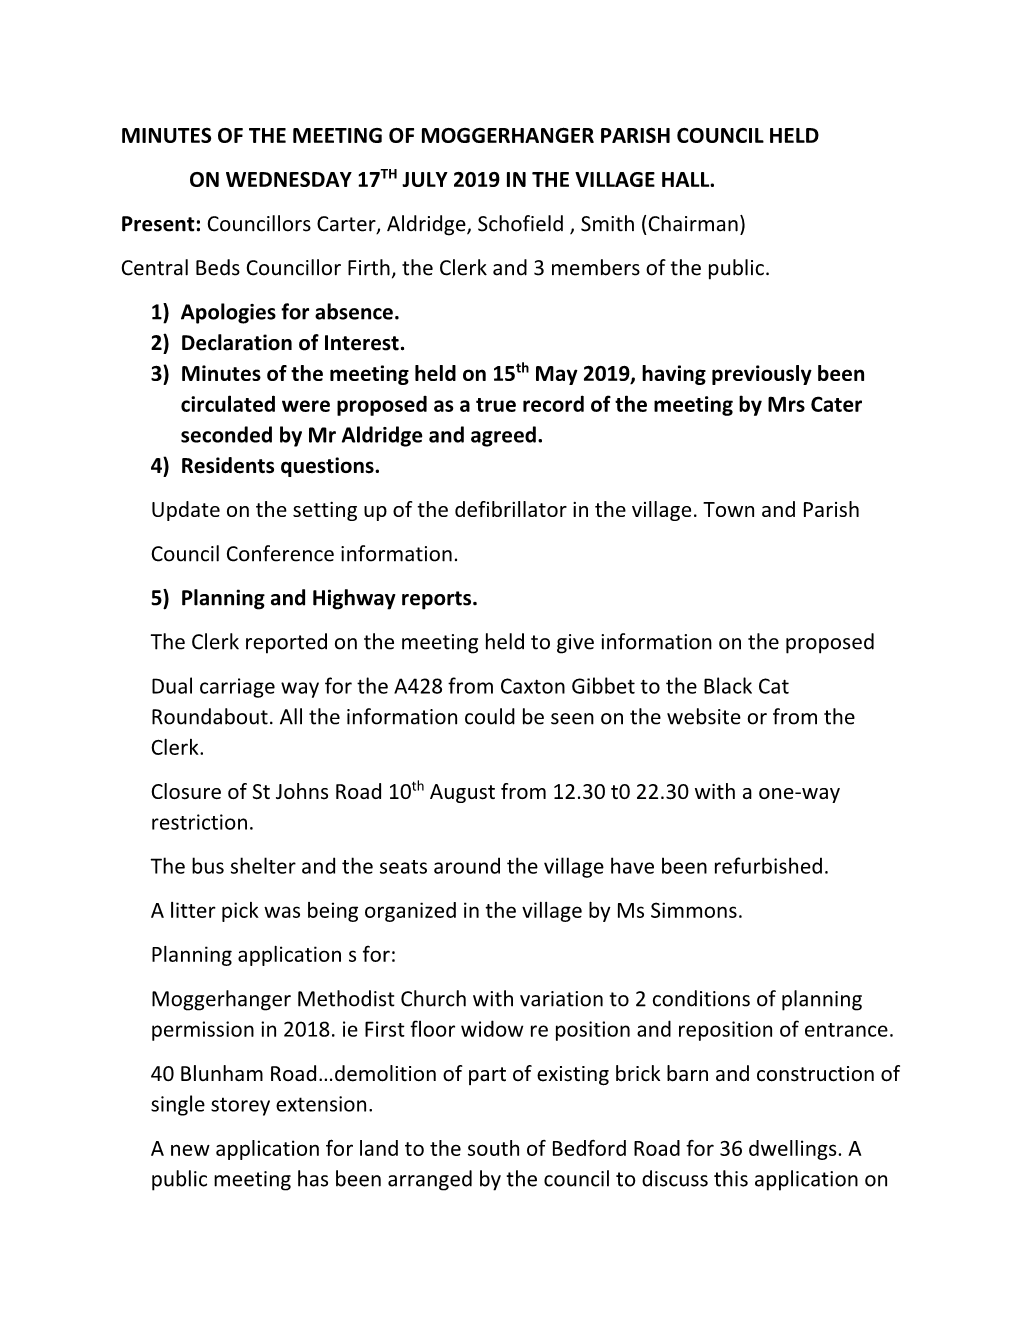 Minutes of the Meeting of Moggerhanger Parish Council Held on Wednesday 17Th July 2019 in the Village Hall